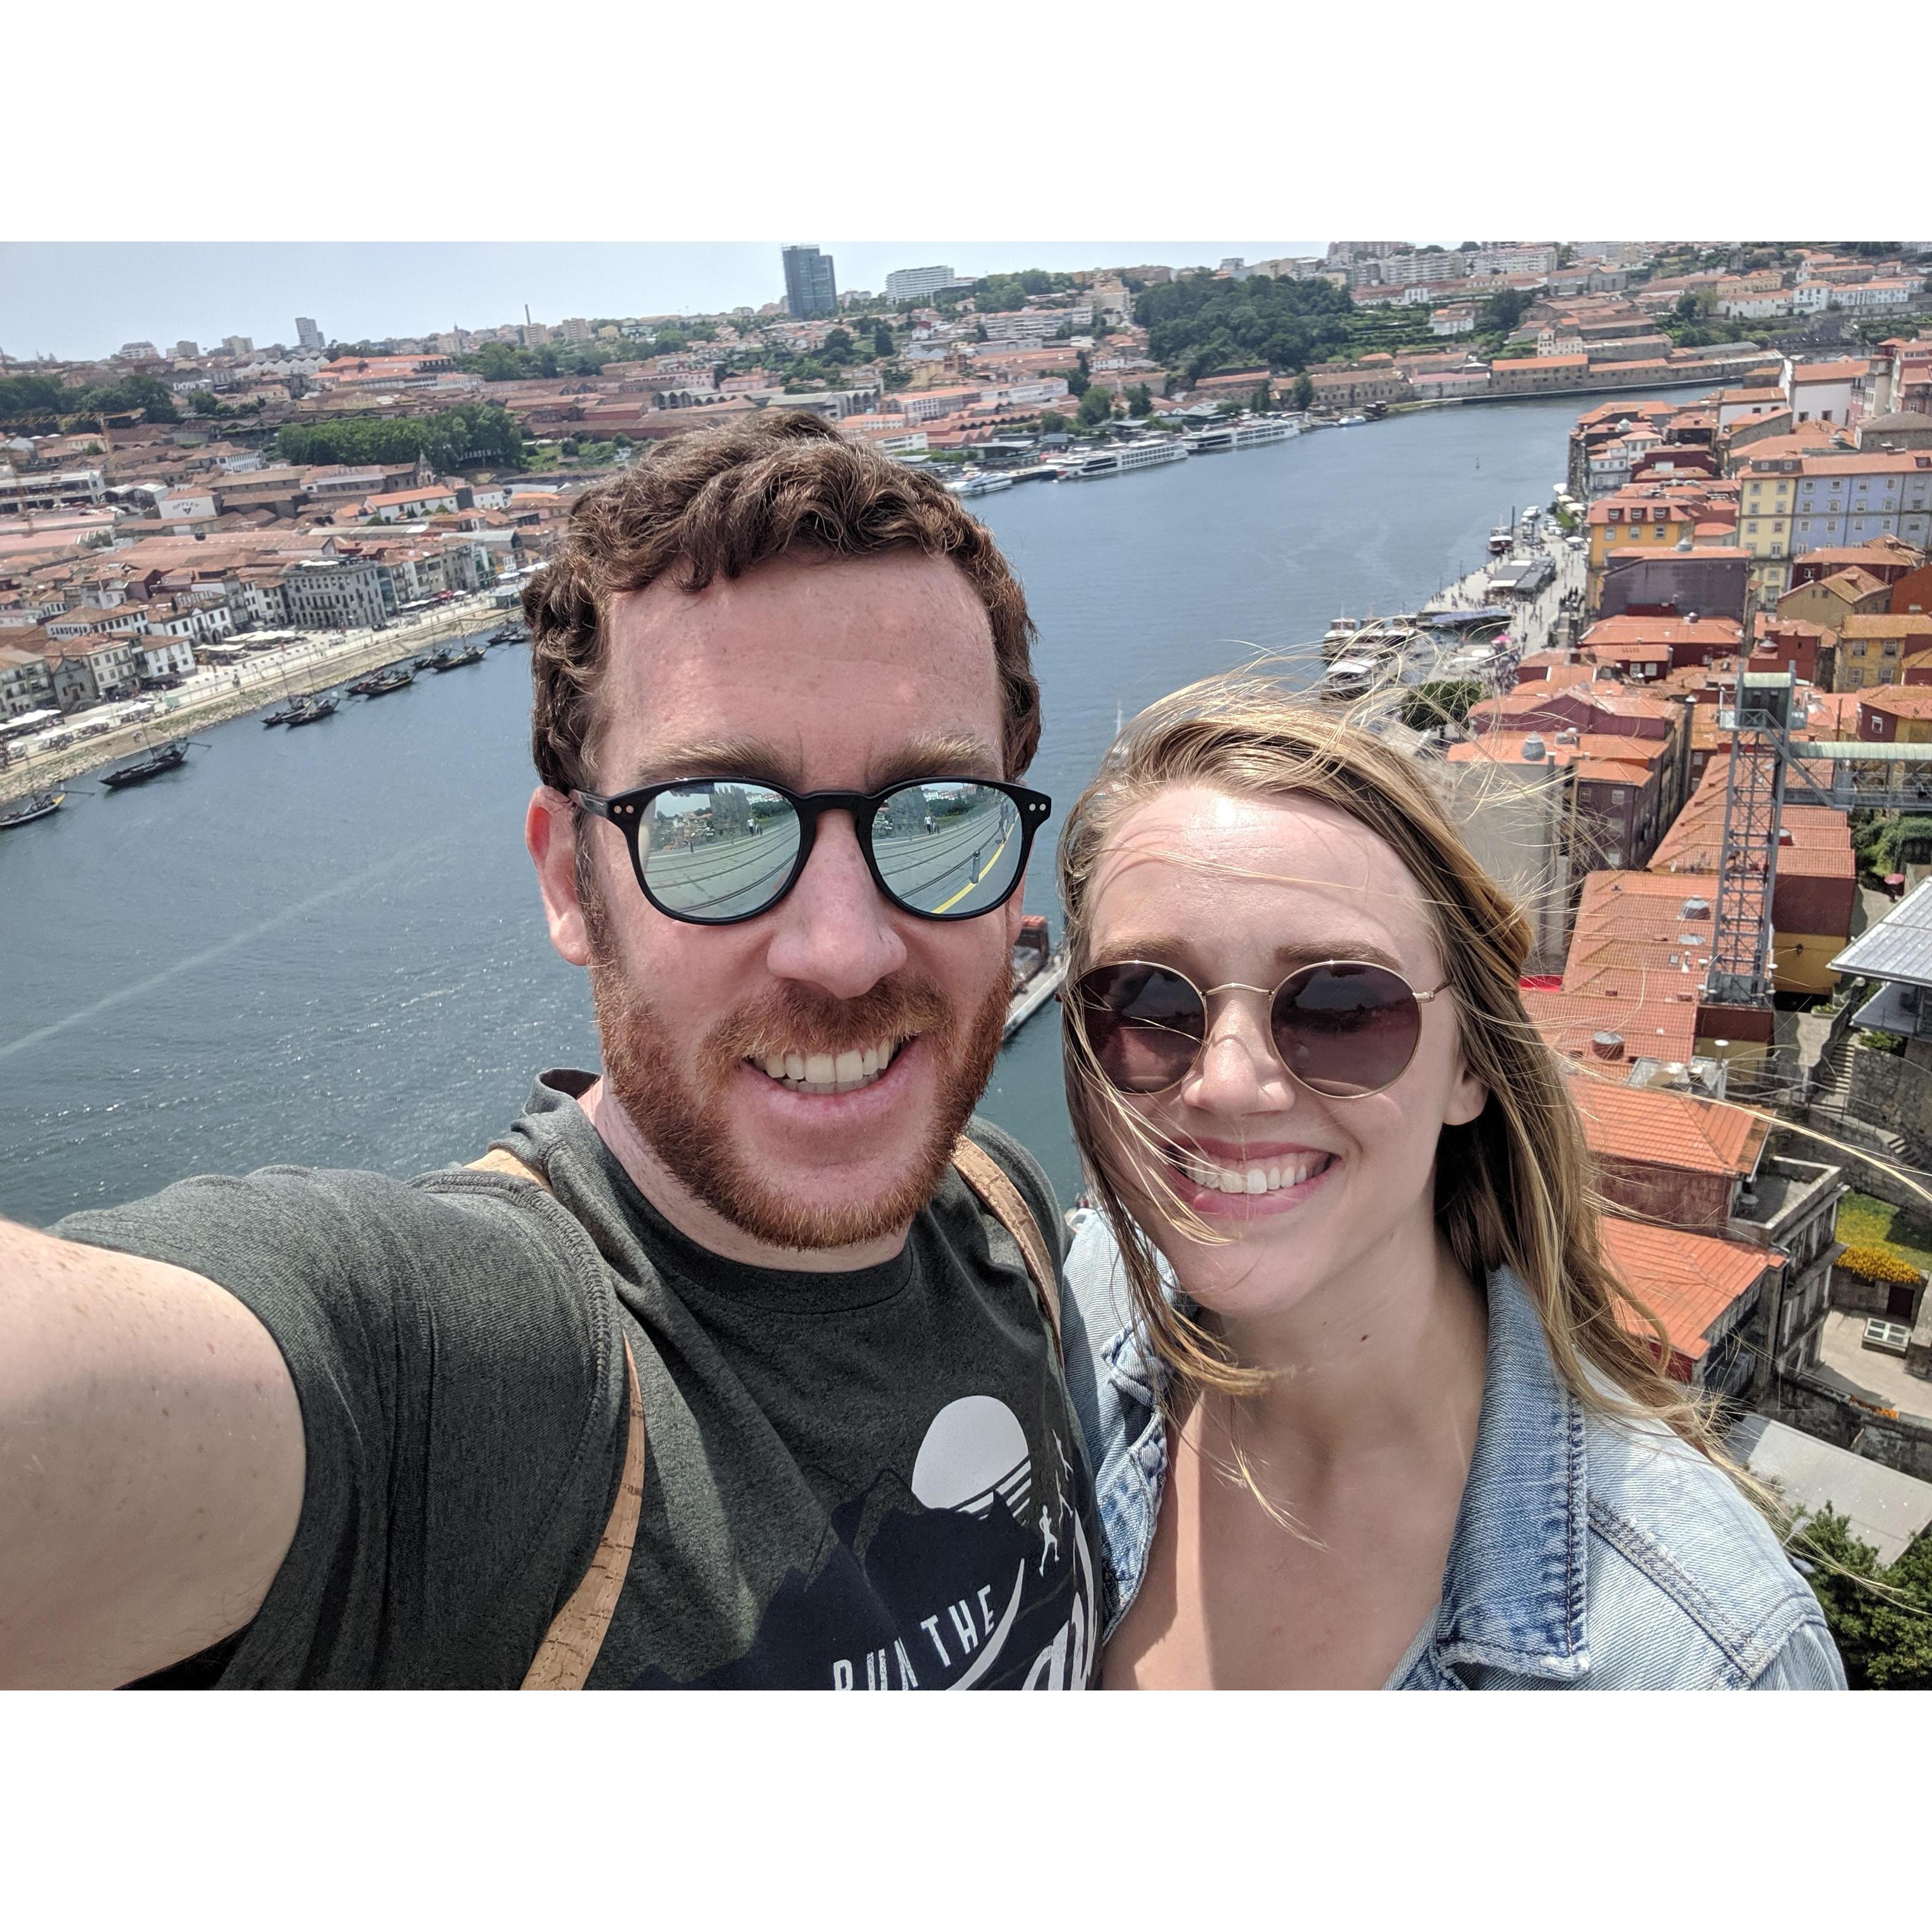 Overlooking the Douro River in Porto